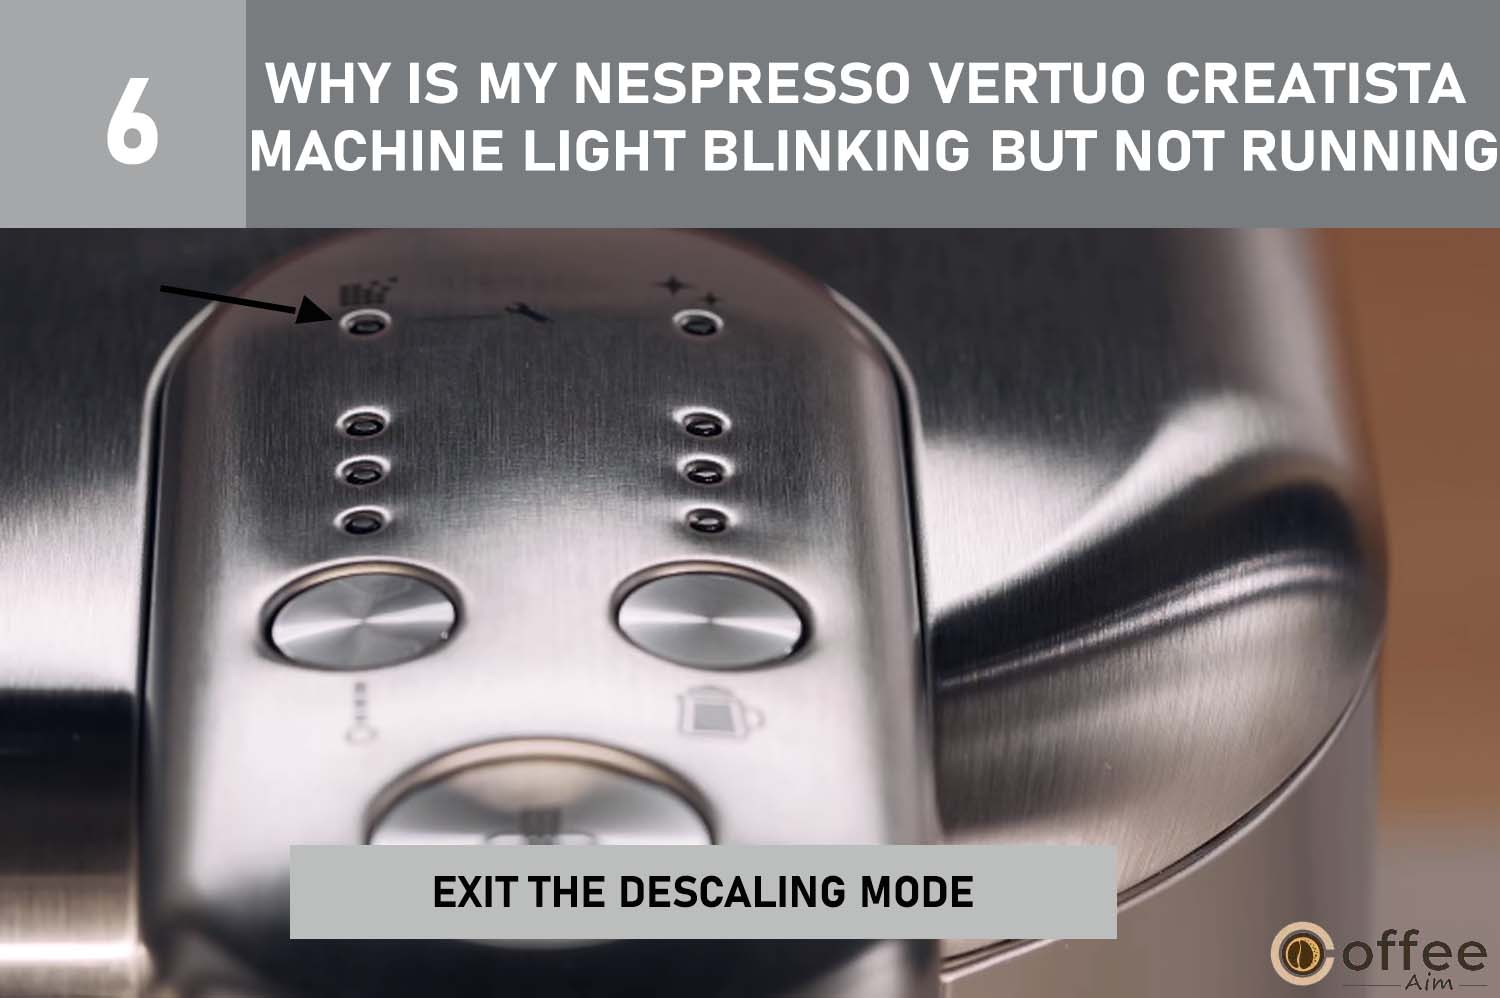 To exit descaling mode on Nespresso Vertuo Creatista, follow steps in the image for the article "Fixing Nespresso Vertuo Creatista Issues."